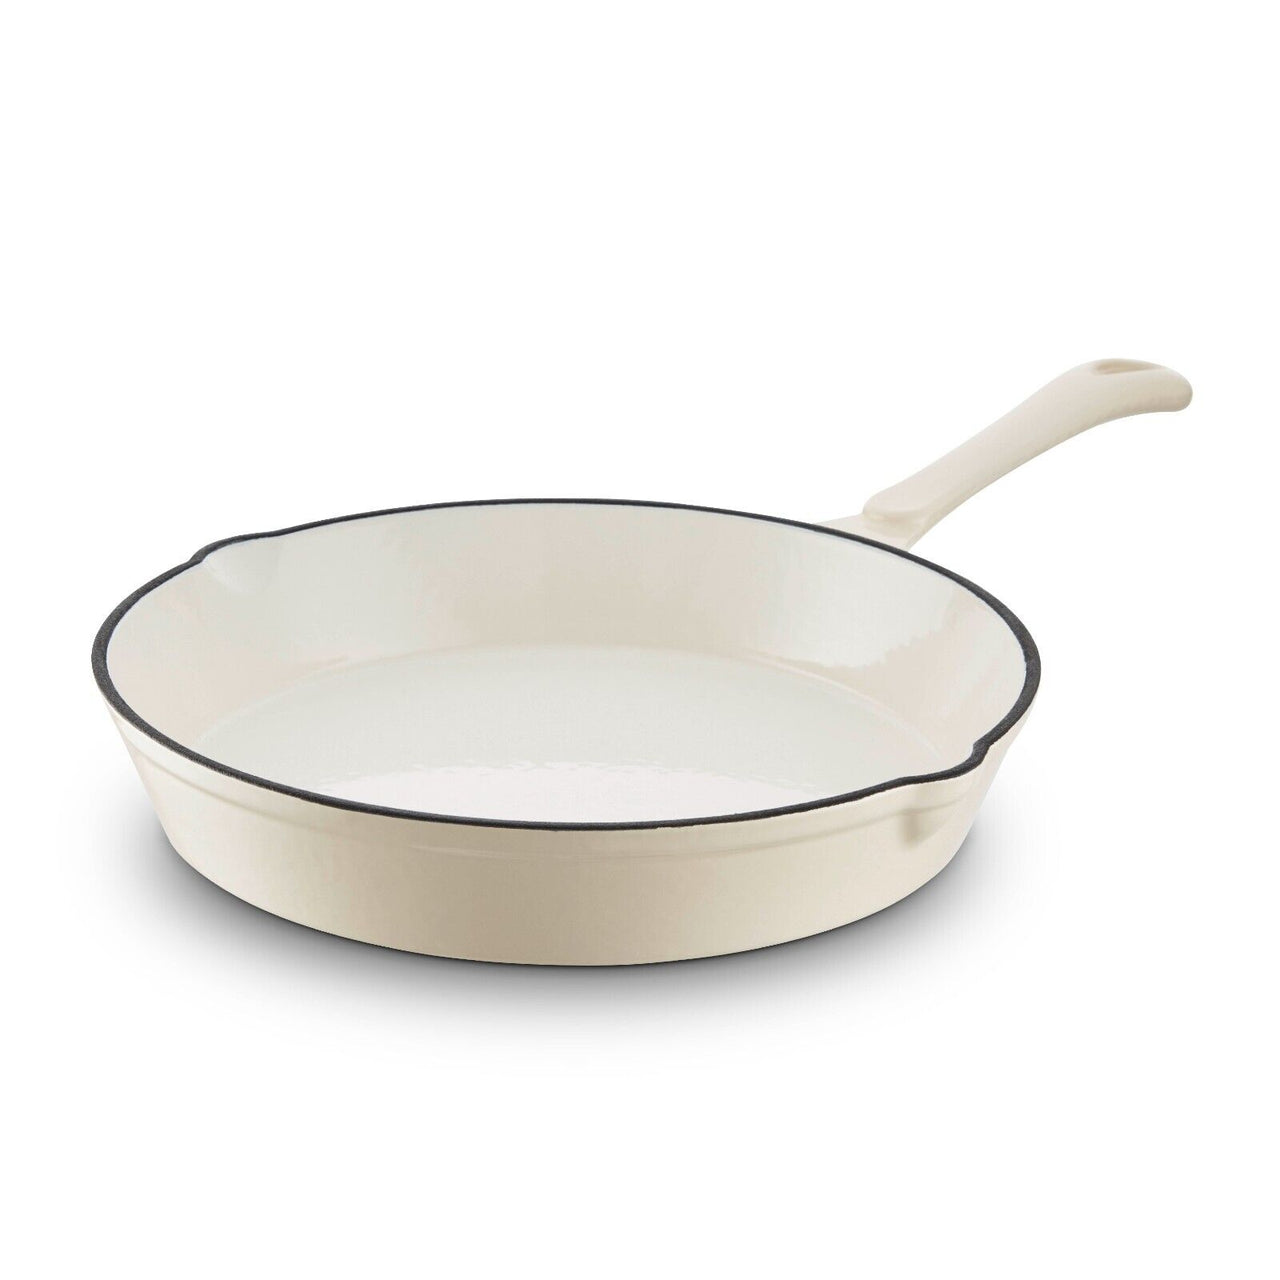 Barbary & Oak 26cm Cast Iron Round Frying Pan in Camembert Cream with 25 Year Guarantee